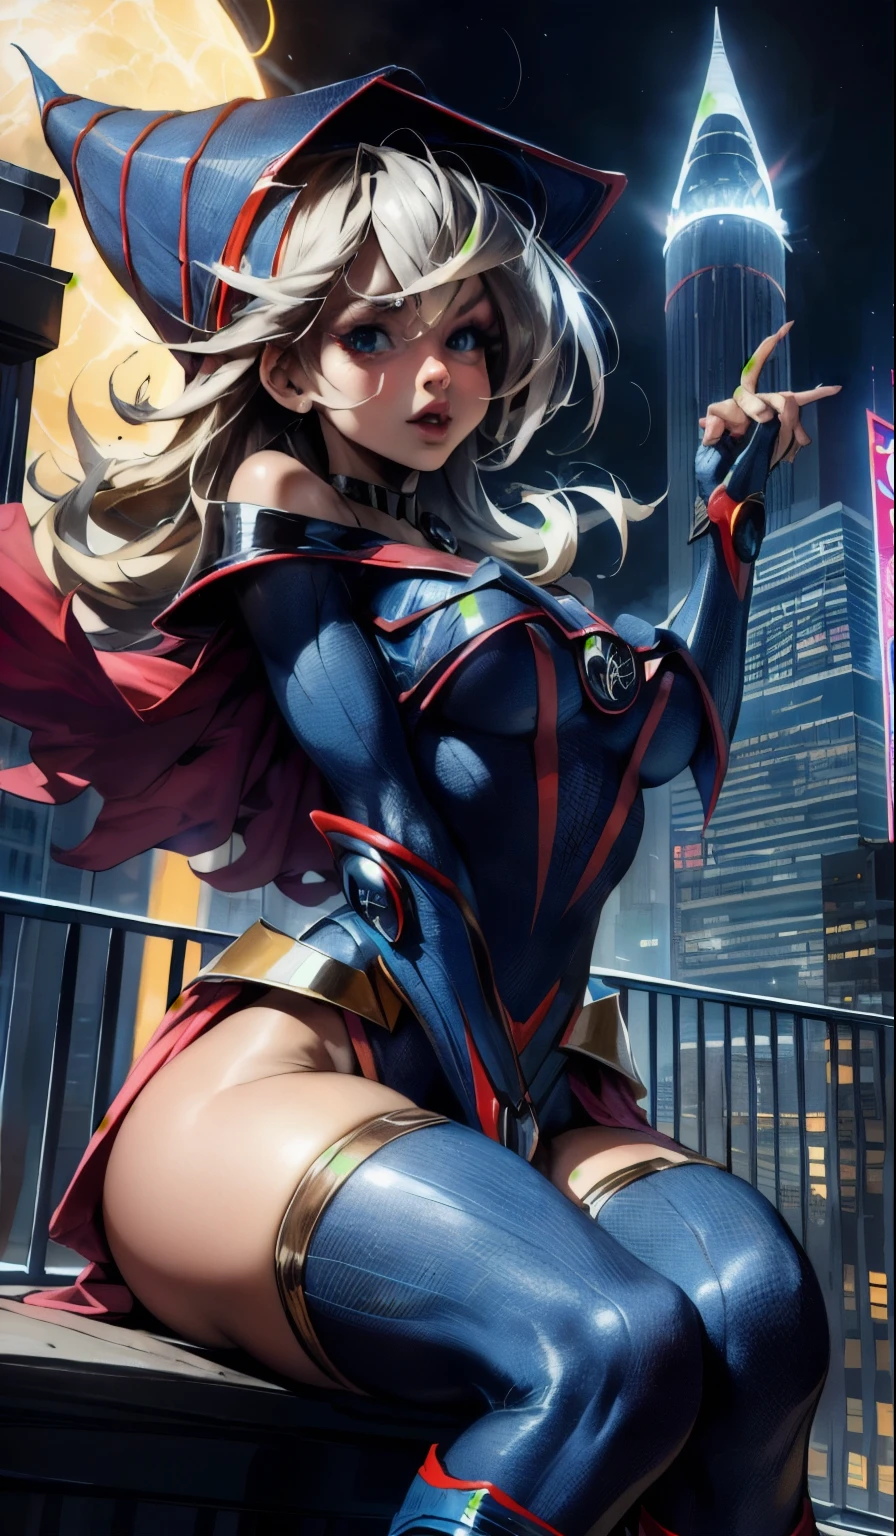 Dark magician gils spiderman version (Masterpiece, 4K resolution, ultrarealistic, Very detailed), (White superhero theme, charismatic, there is a girl on top of the city, wearing Spider-Man costume, she is a superhero), [ ((25 years), (long and blond hair:1.2), whole body, (Blue eyes:1.2), ( jumping from one building to another), ((sandy urban environment):0.8)| (urban landscape, At night, dynamic lights), (full moon))] # Explanation: The message mainly describes a 4K ultra high definition painting., very realistic, Very detailed. Shows a superheroine on top of the city., wearing a Spider-Man costume. The theme of the painting is a superhero theme. Sensual and innocent pose 